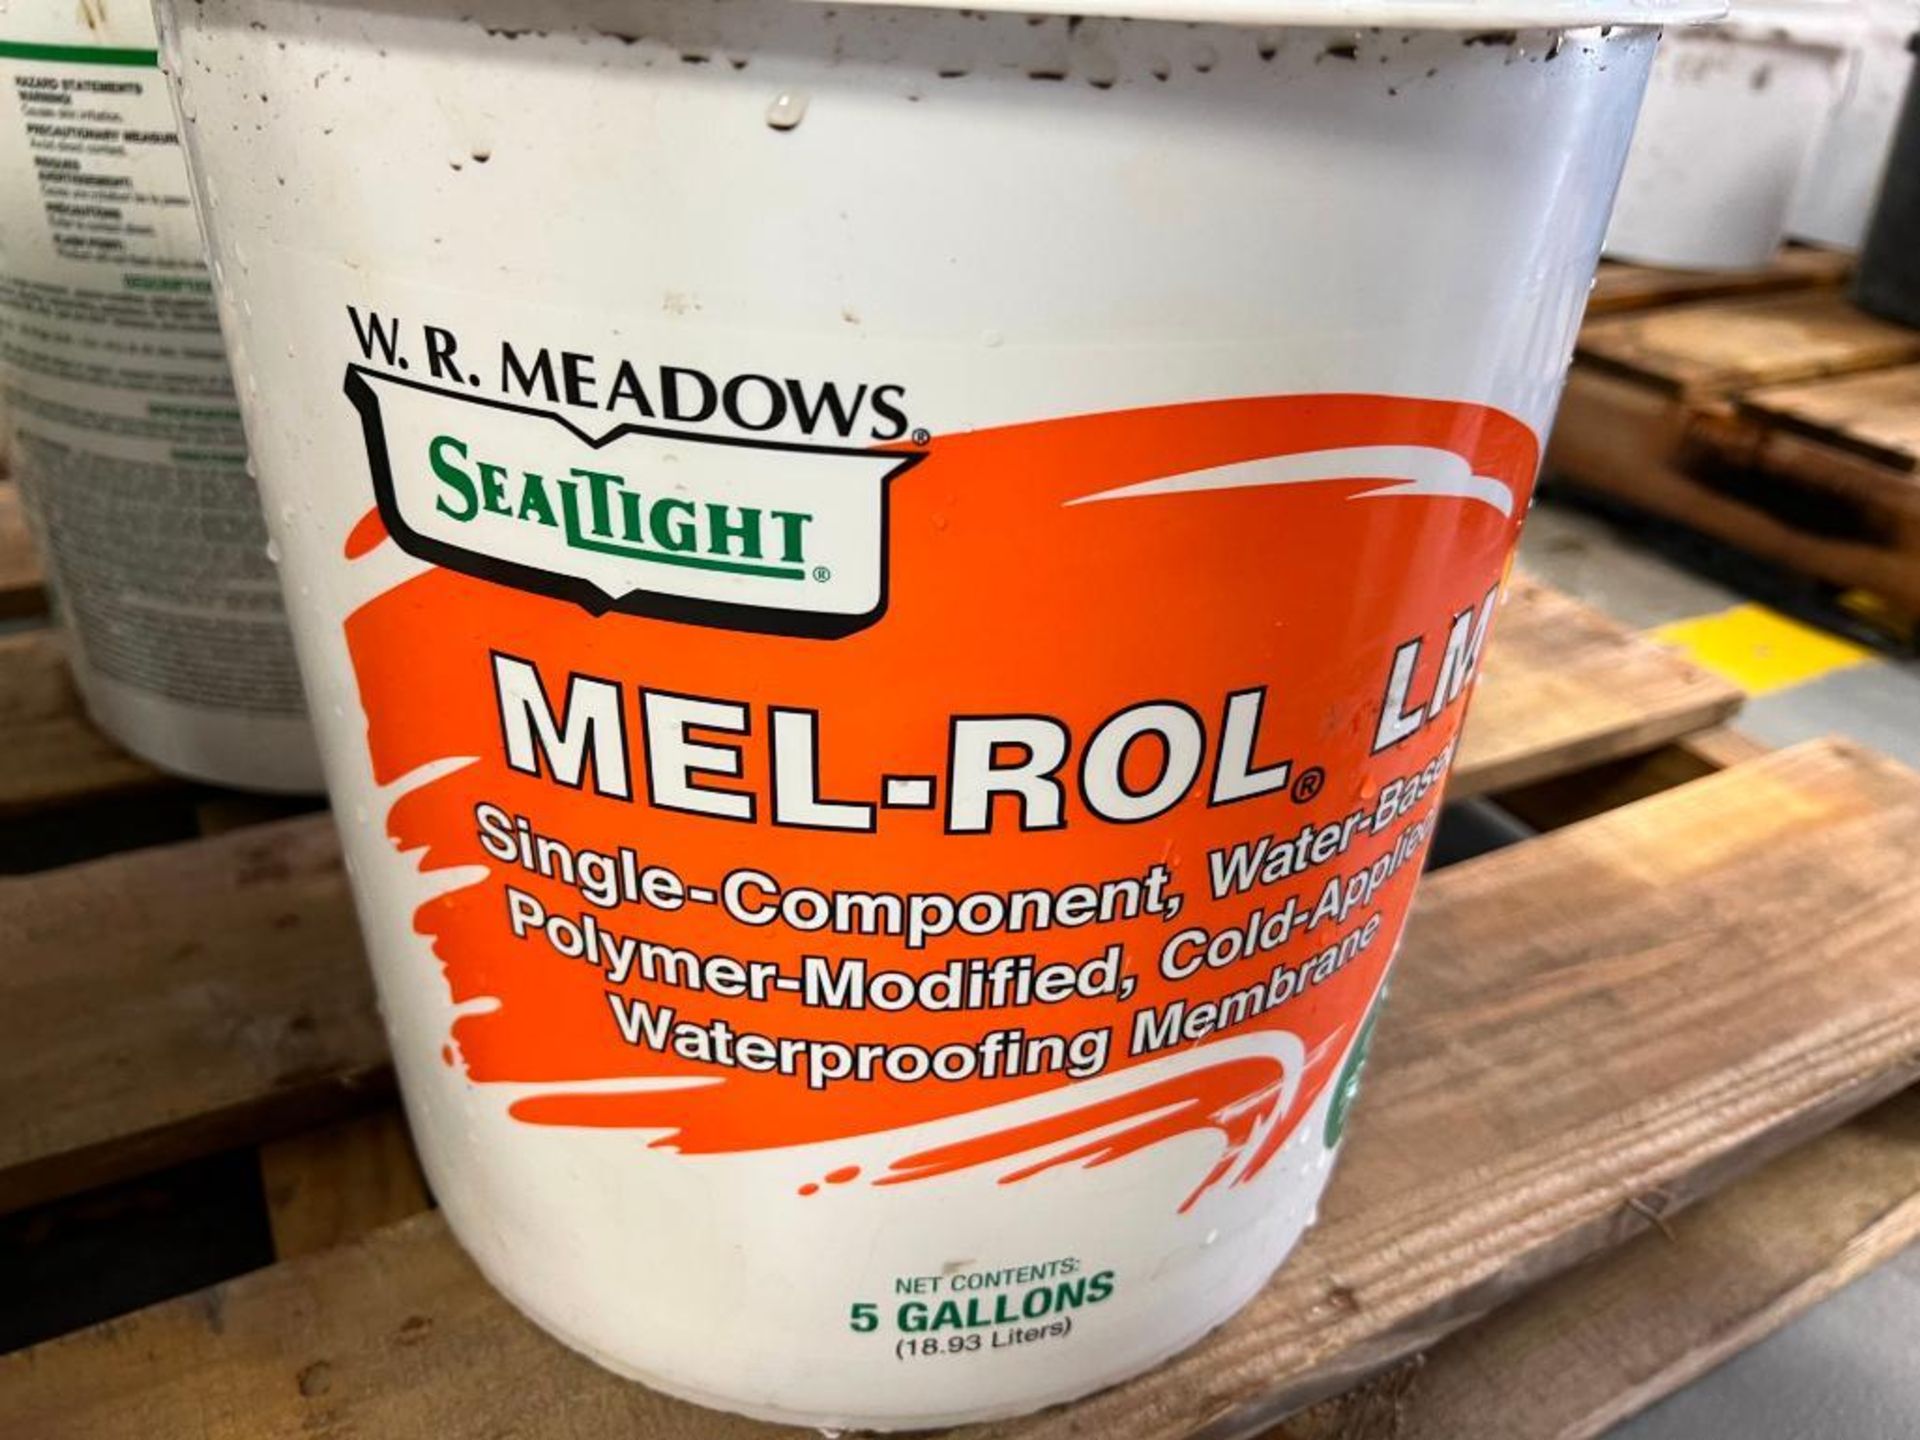 (4) 5 Gallon Buckets for Seal Tight Mel-Rol LM-B Single Component Waterproofing Membrane. Located in - Image 2 of 2